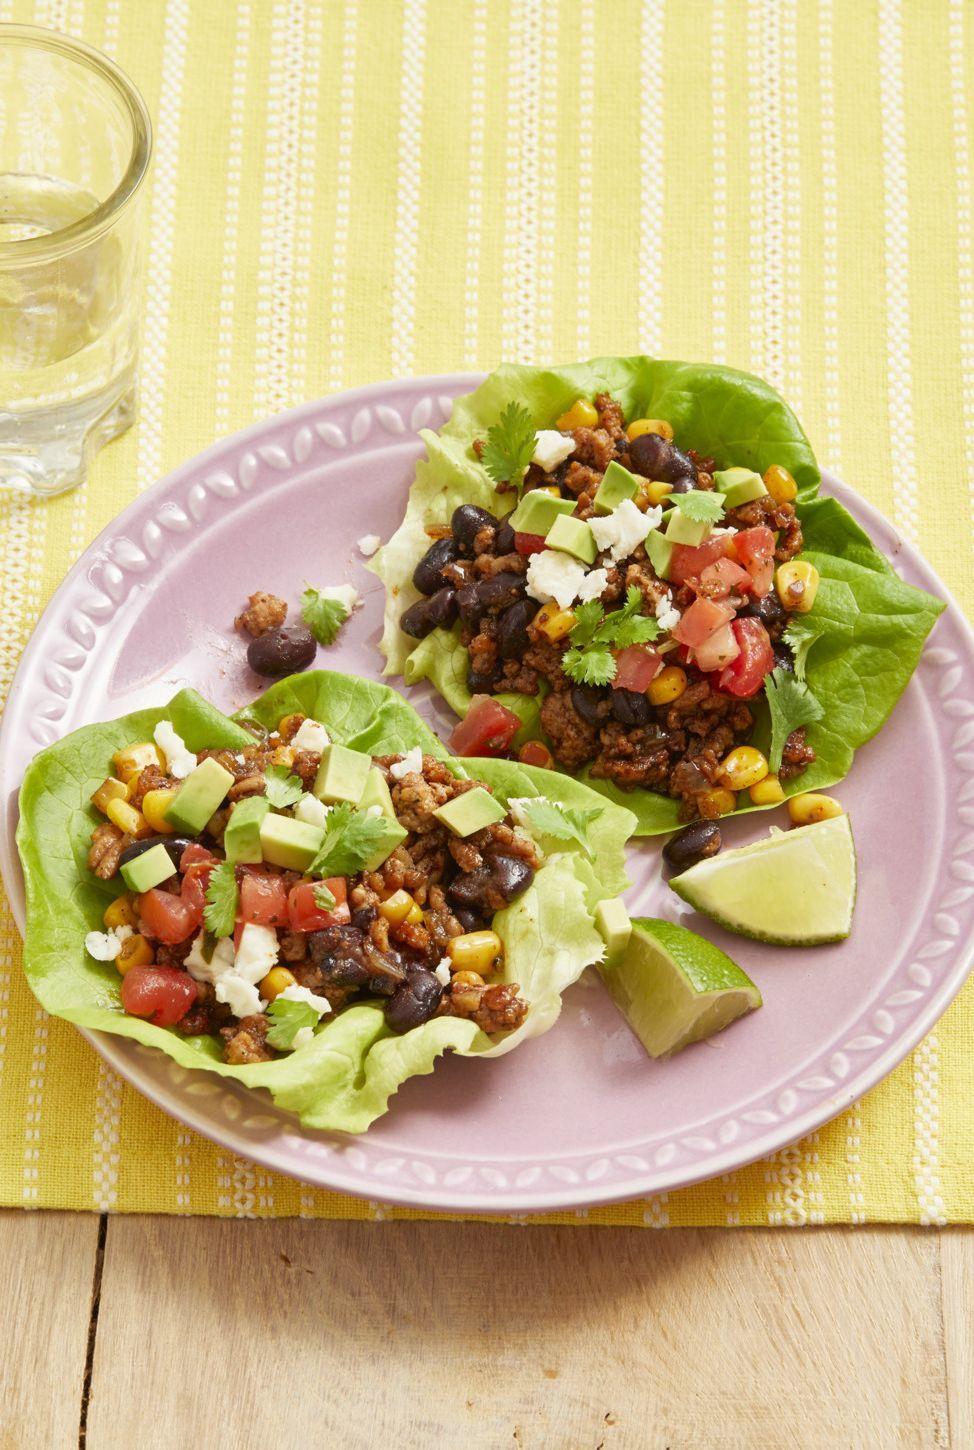 The Real Food Academy Miami's zesty black bean, avocado, and corn salad in lettuce chips recipe.